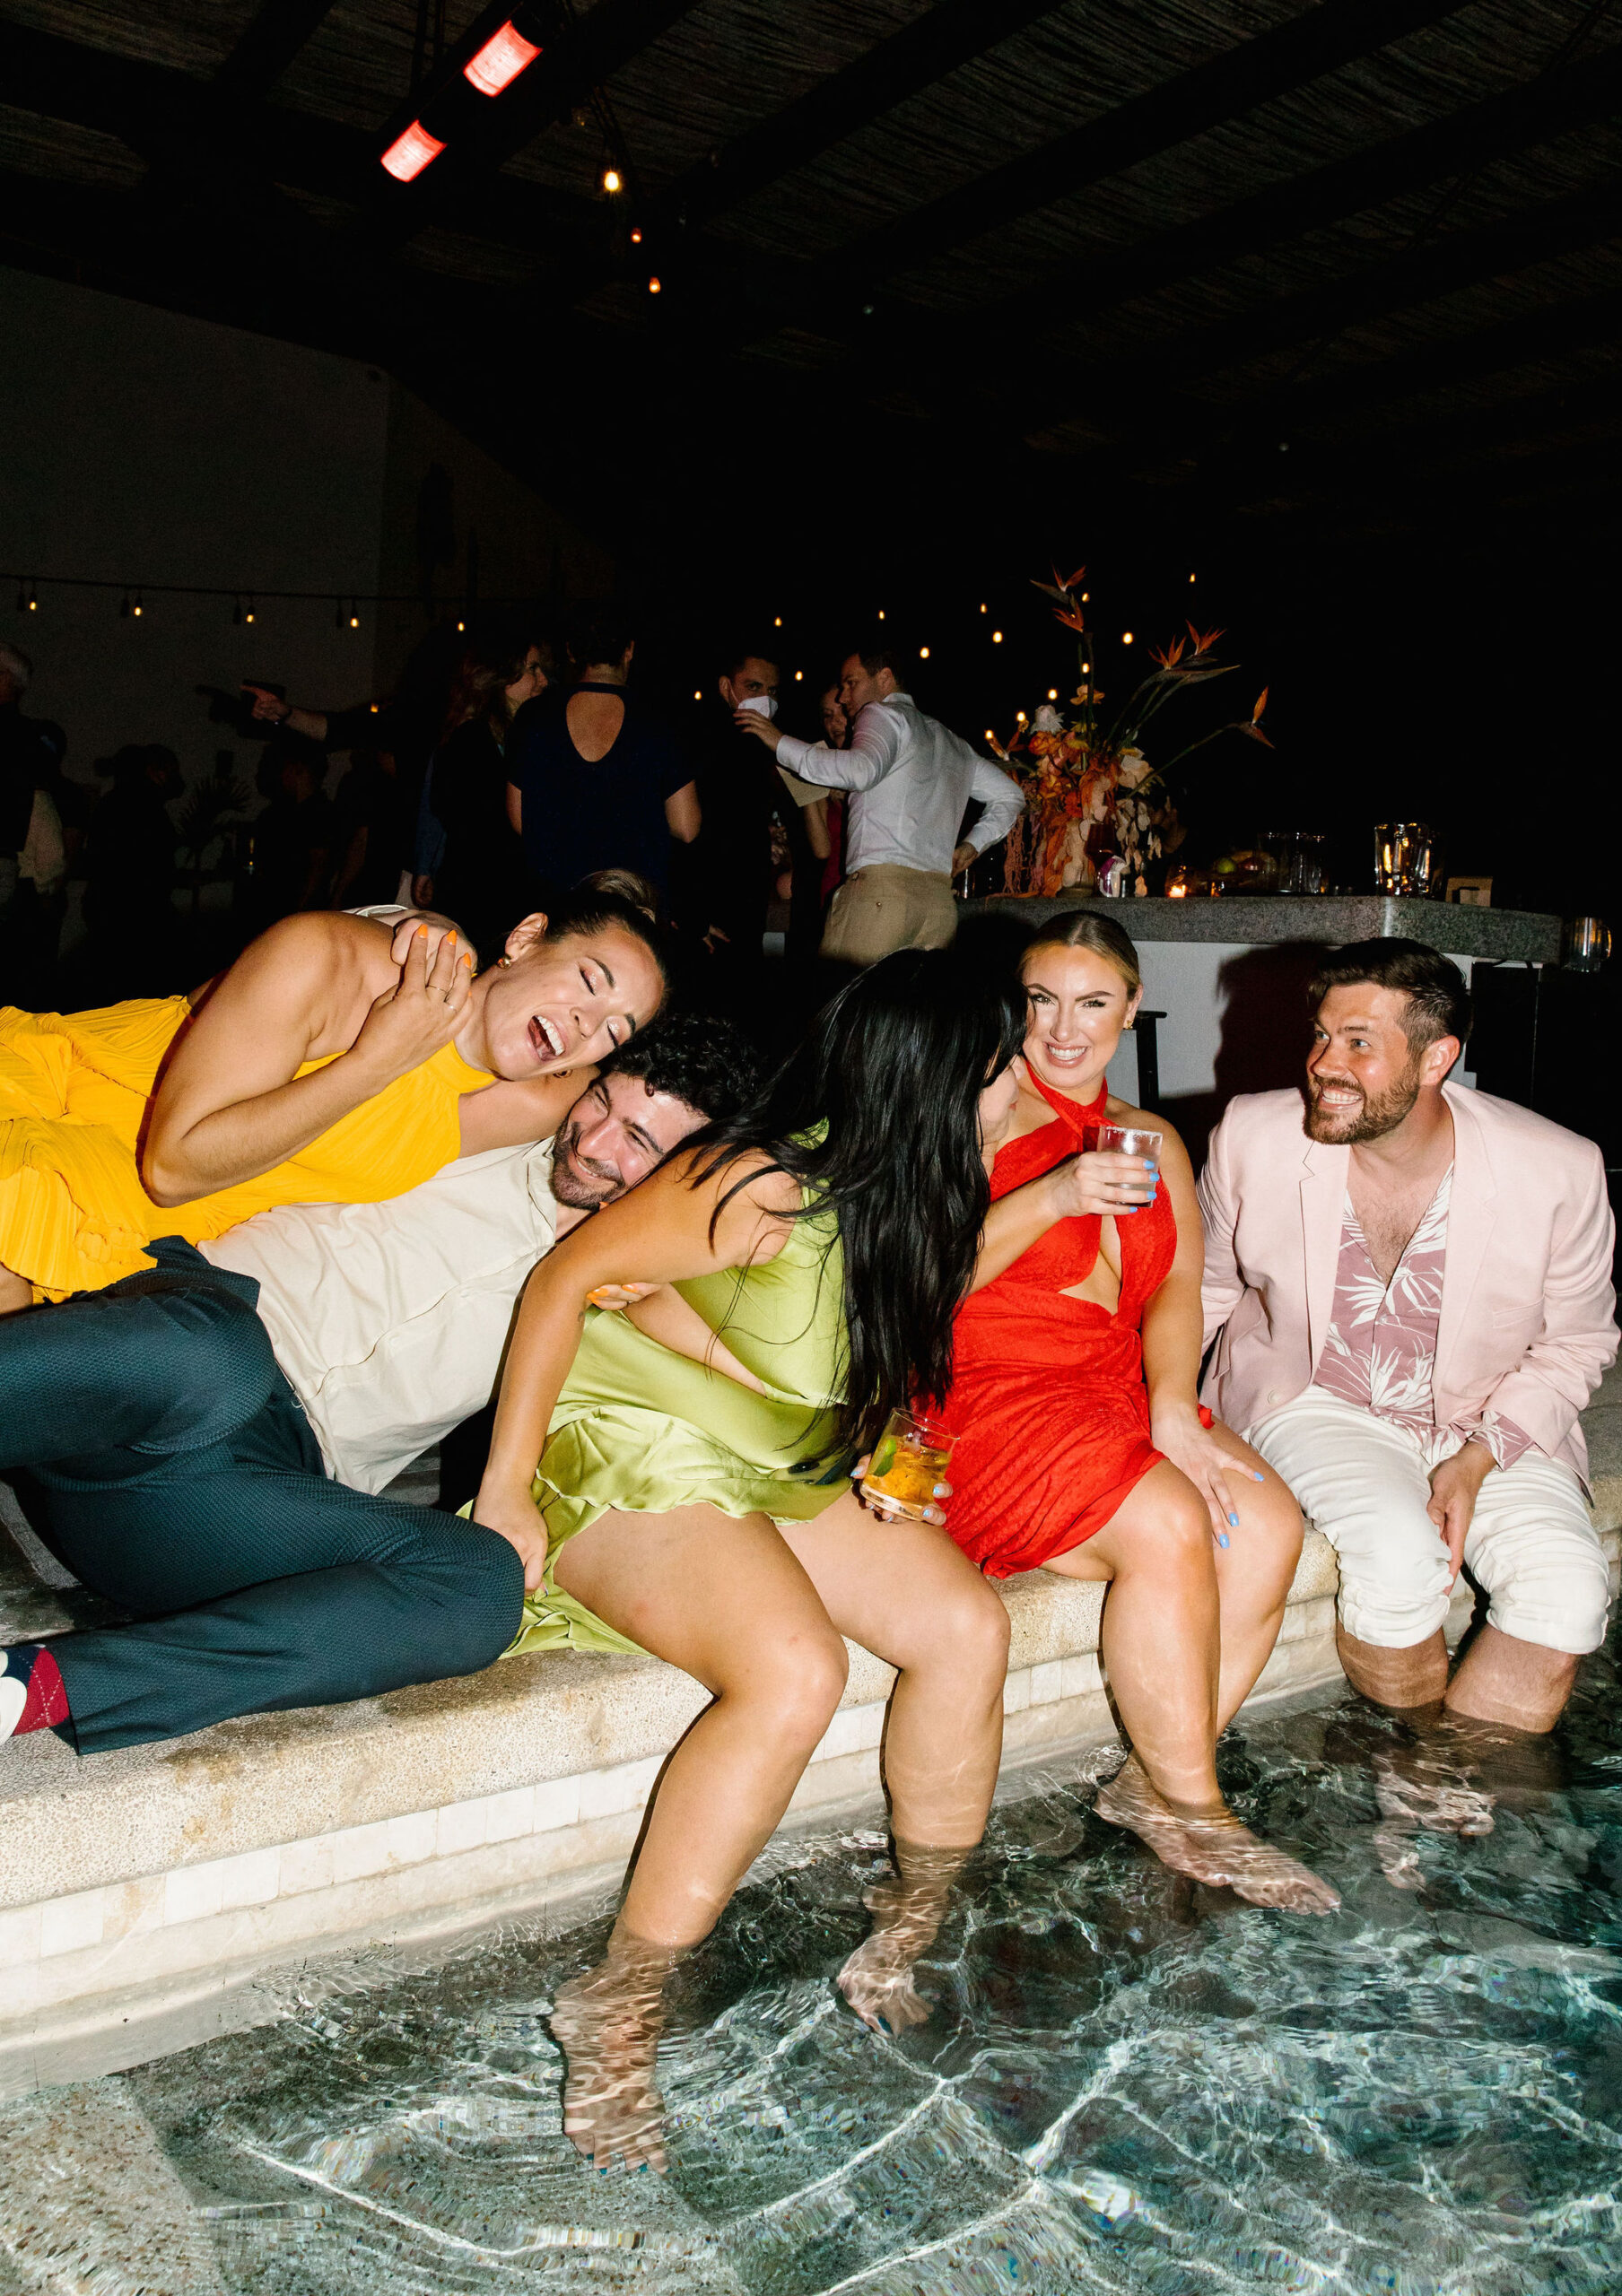 hotel el ganzo rooftop pool wedding dance party bride and friends dog pile beautiful extra large birds of paradise bar arrangement colorful wedding guest attire